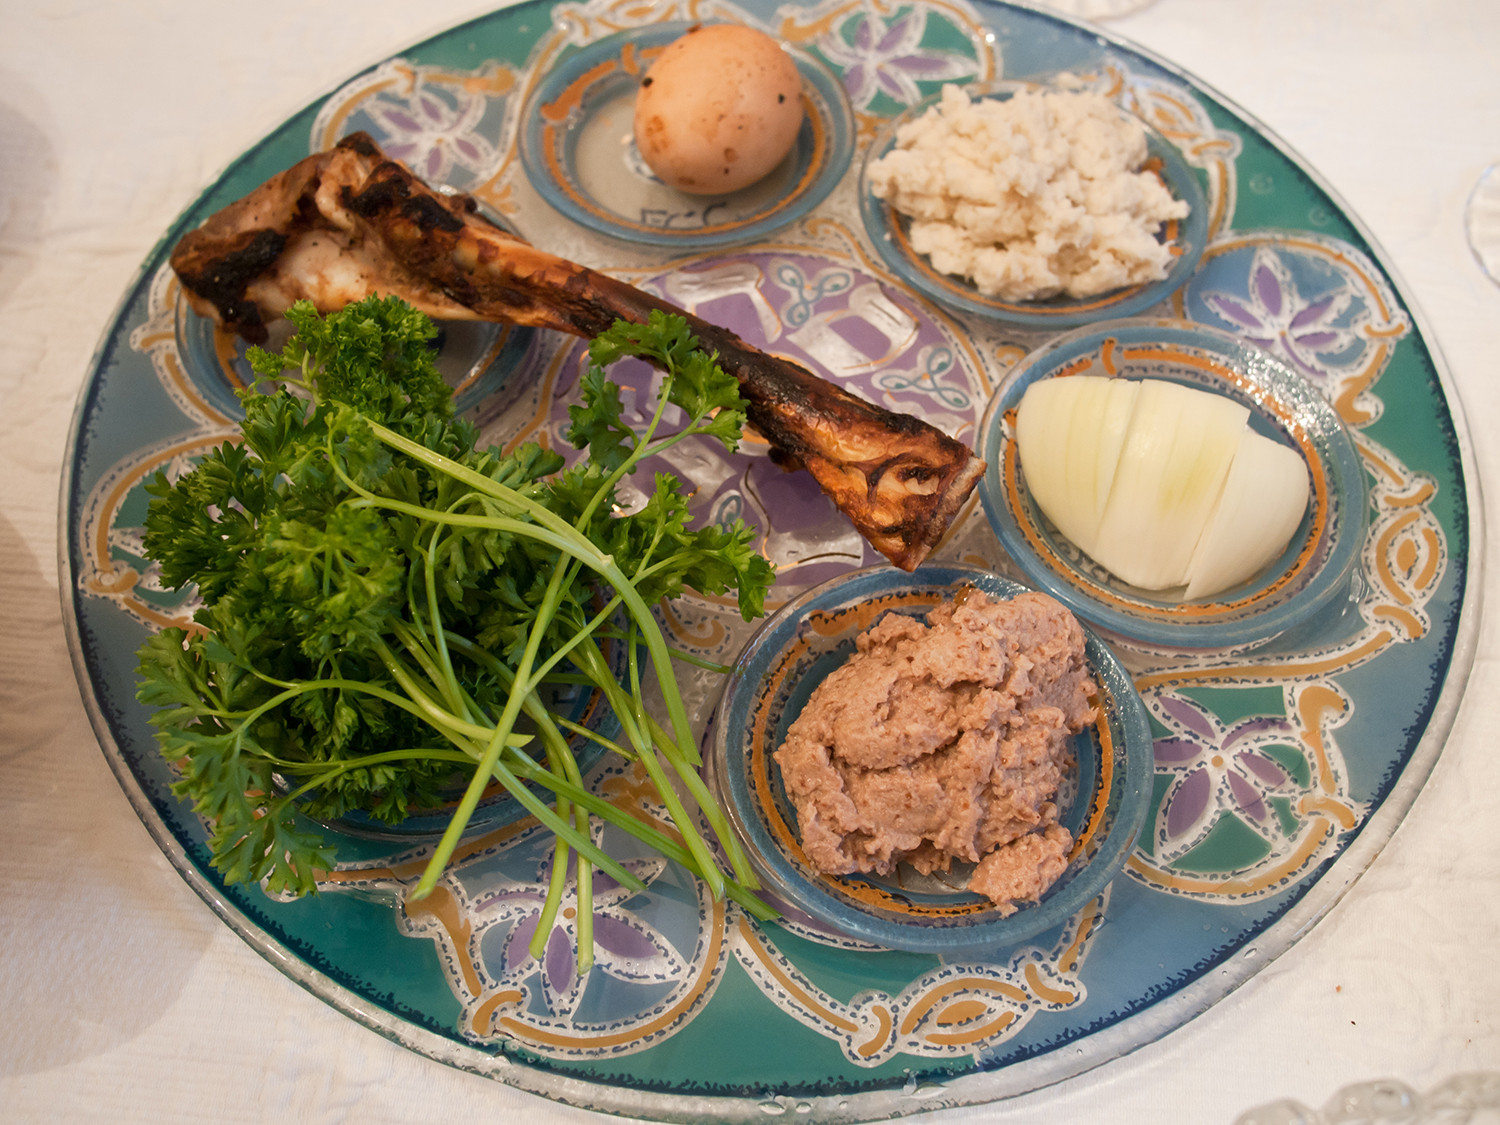 Passover Seder Food
 Why Christians should think hard before holding Seder